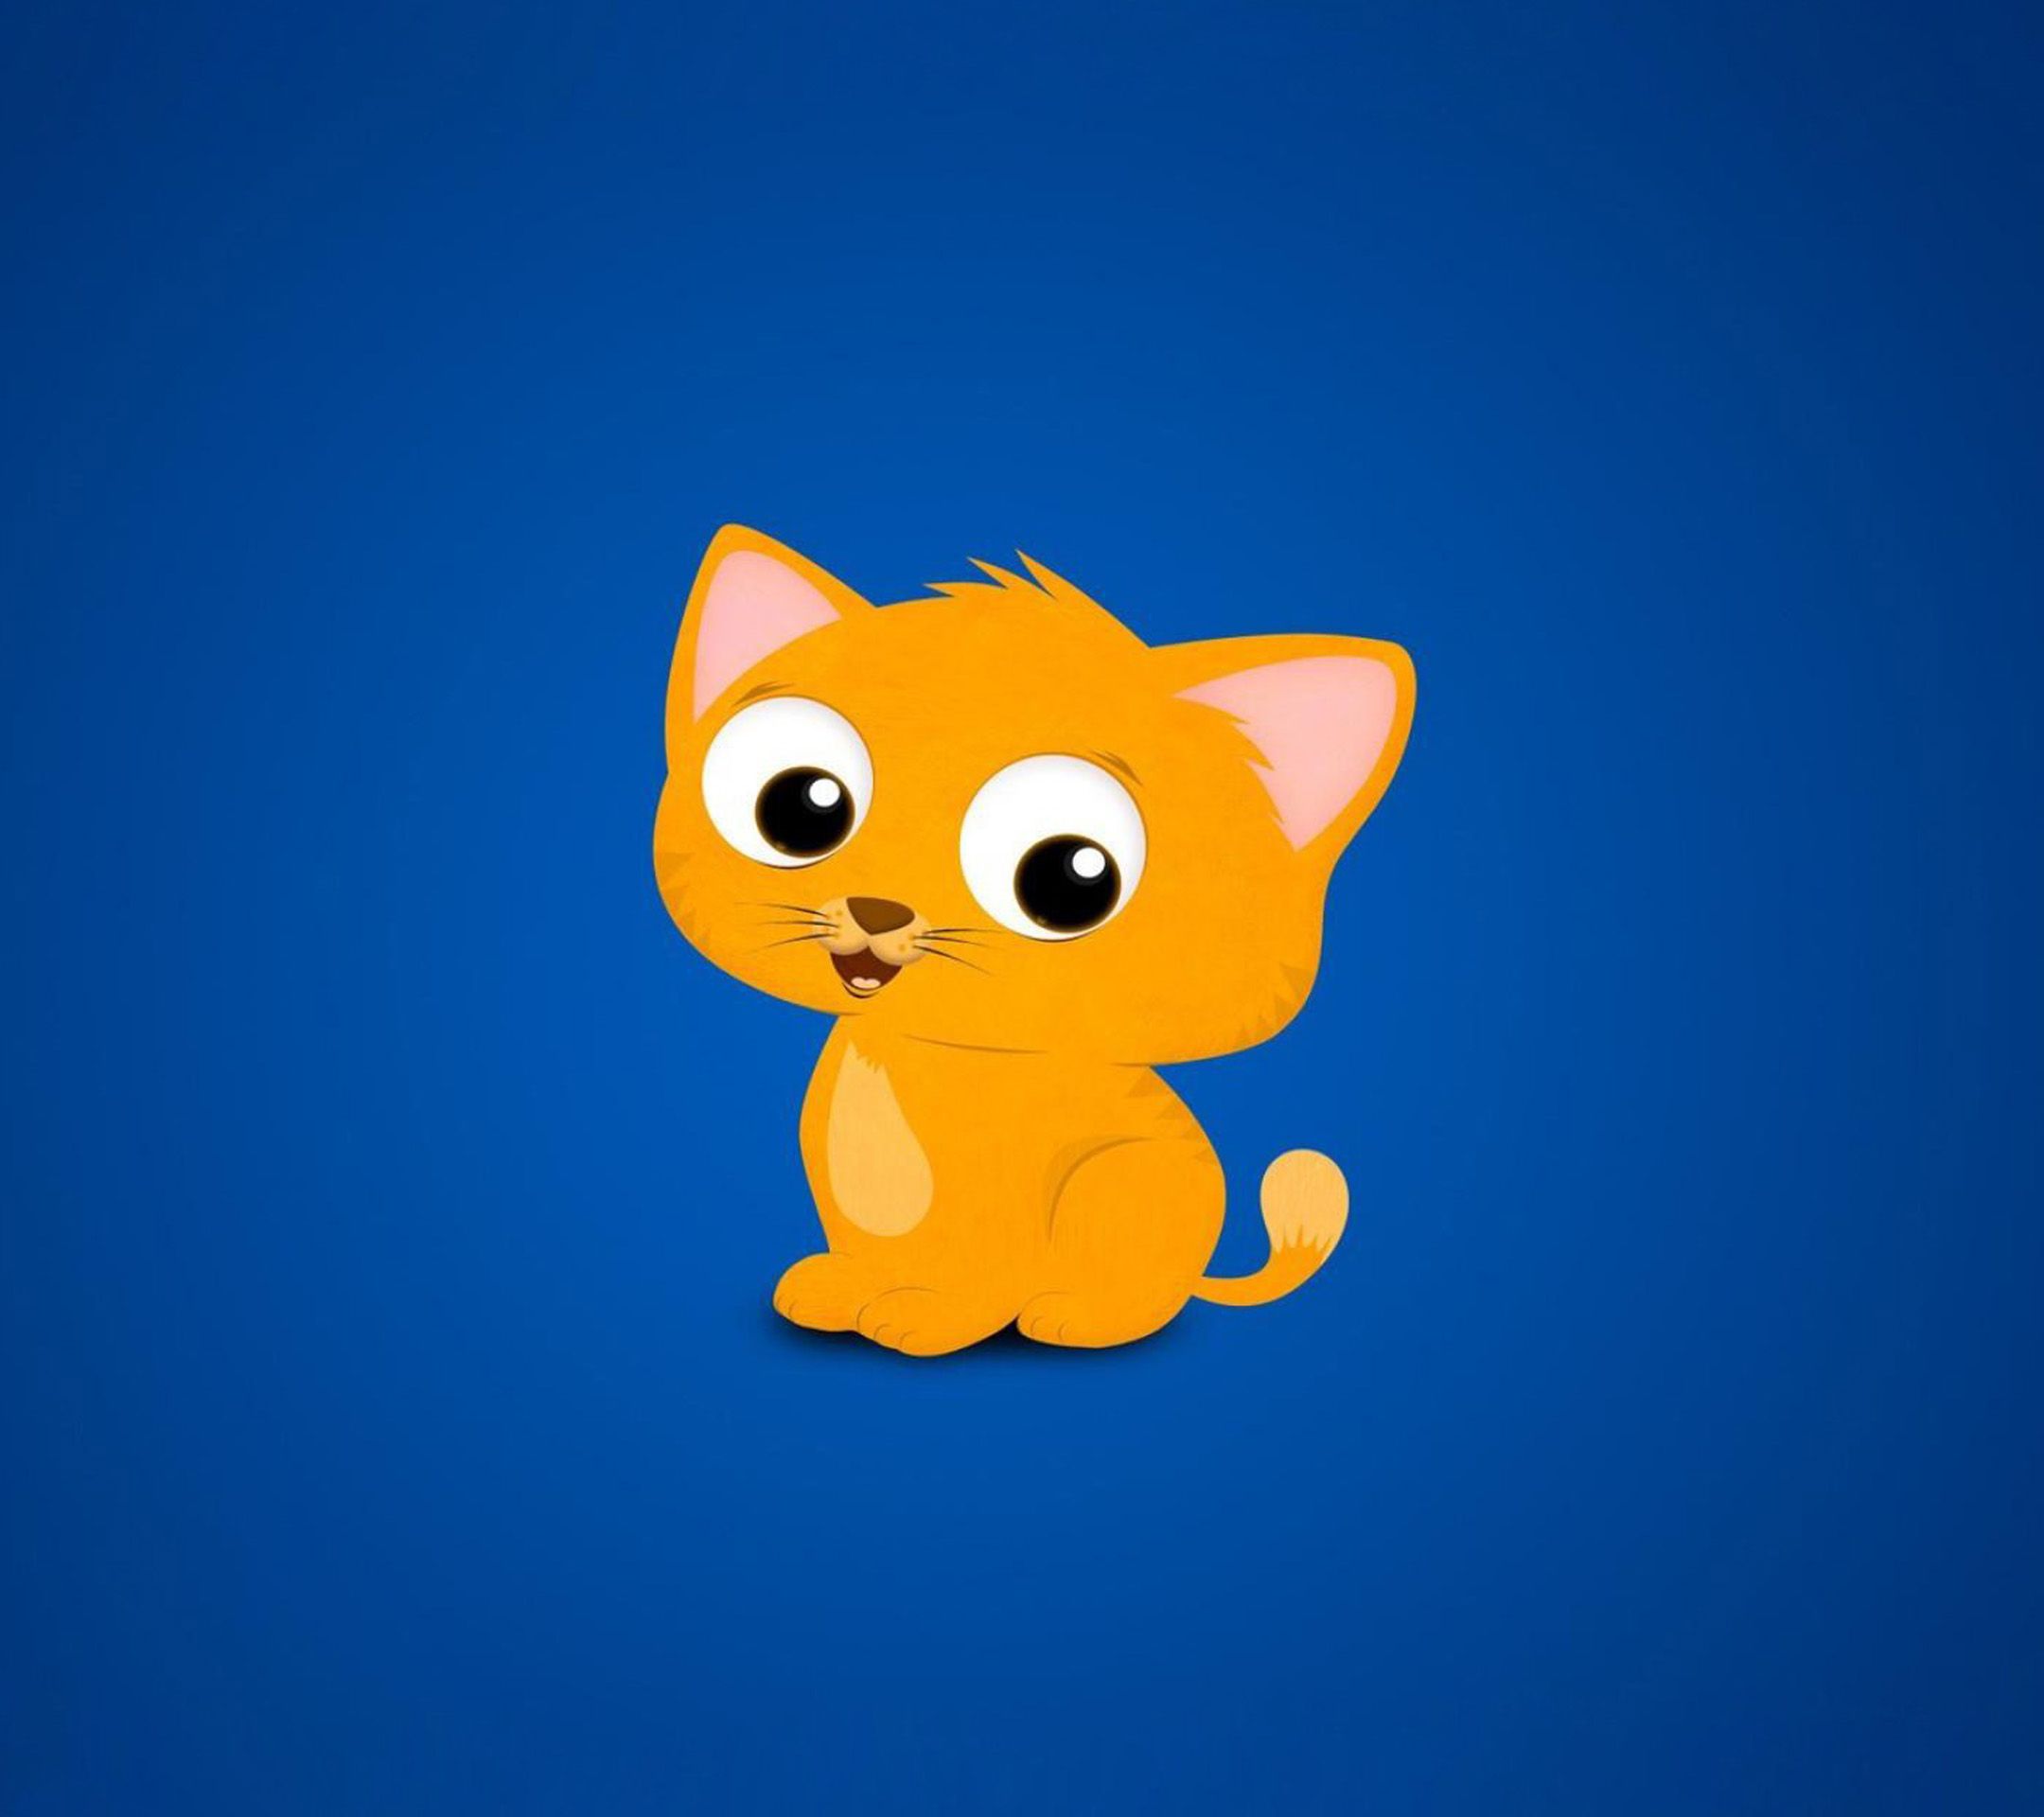 Cute Cartoon Cat Galaxy S4 Wallpaper Background And Themes